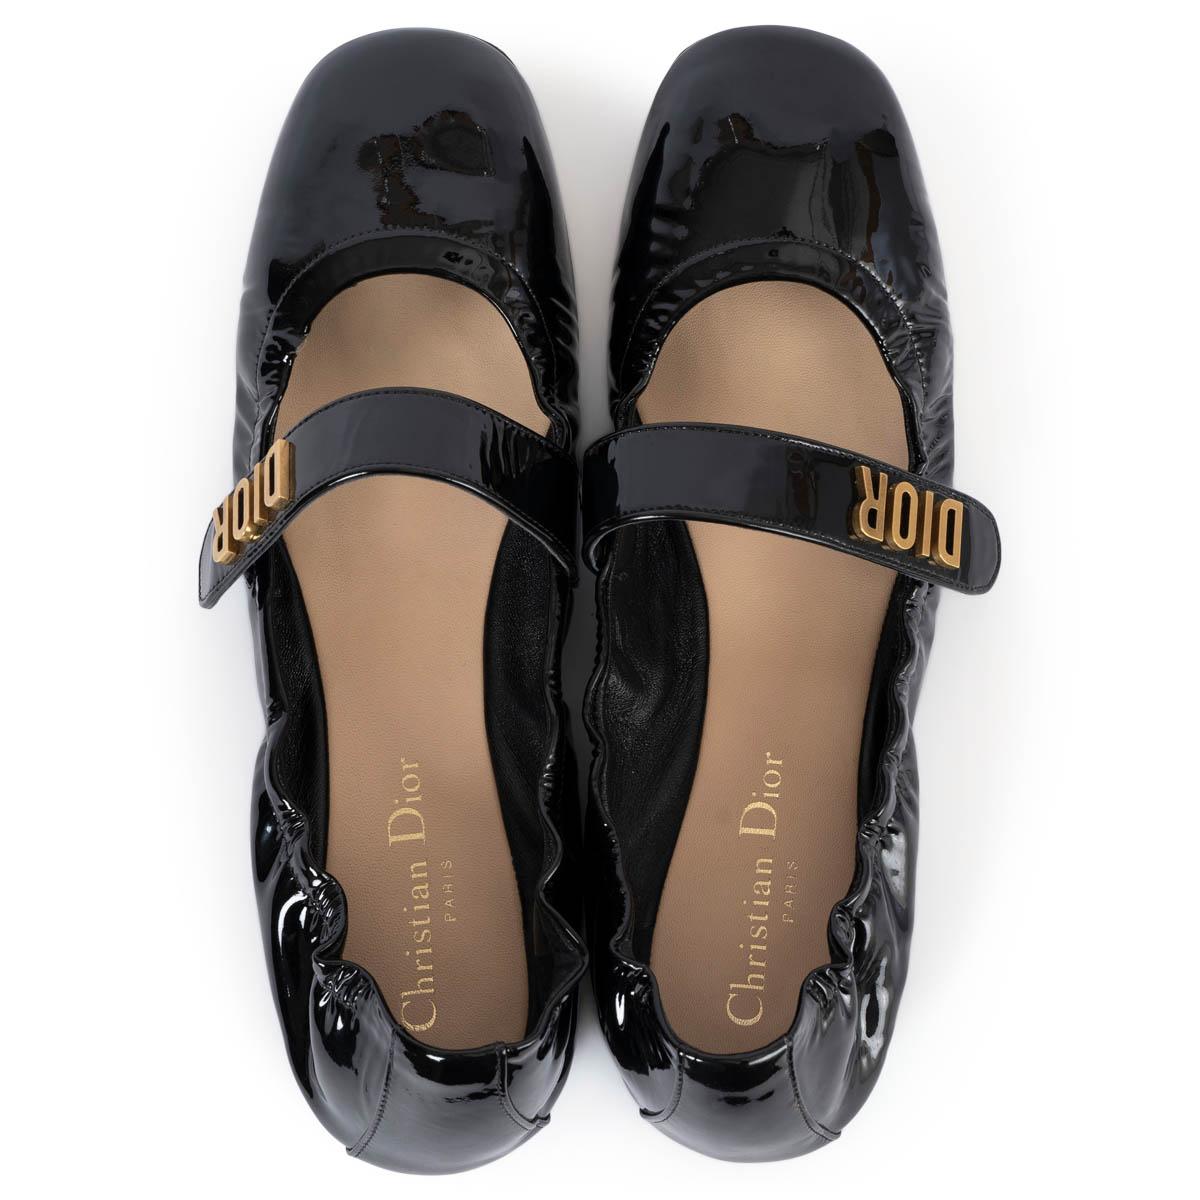 CHRISTIAN DIOR black patent leather BABY-D BALLET Flats Shoes 39 For Sale 2